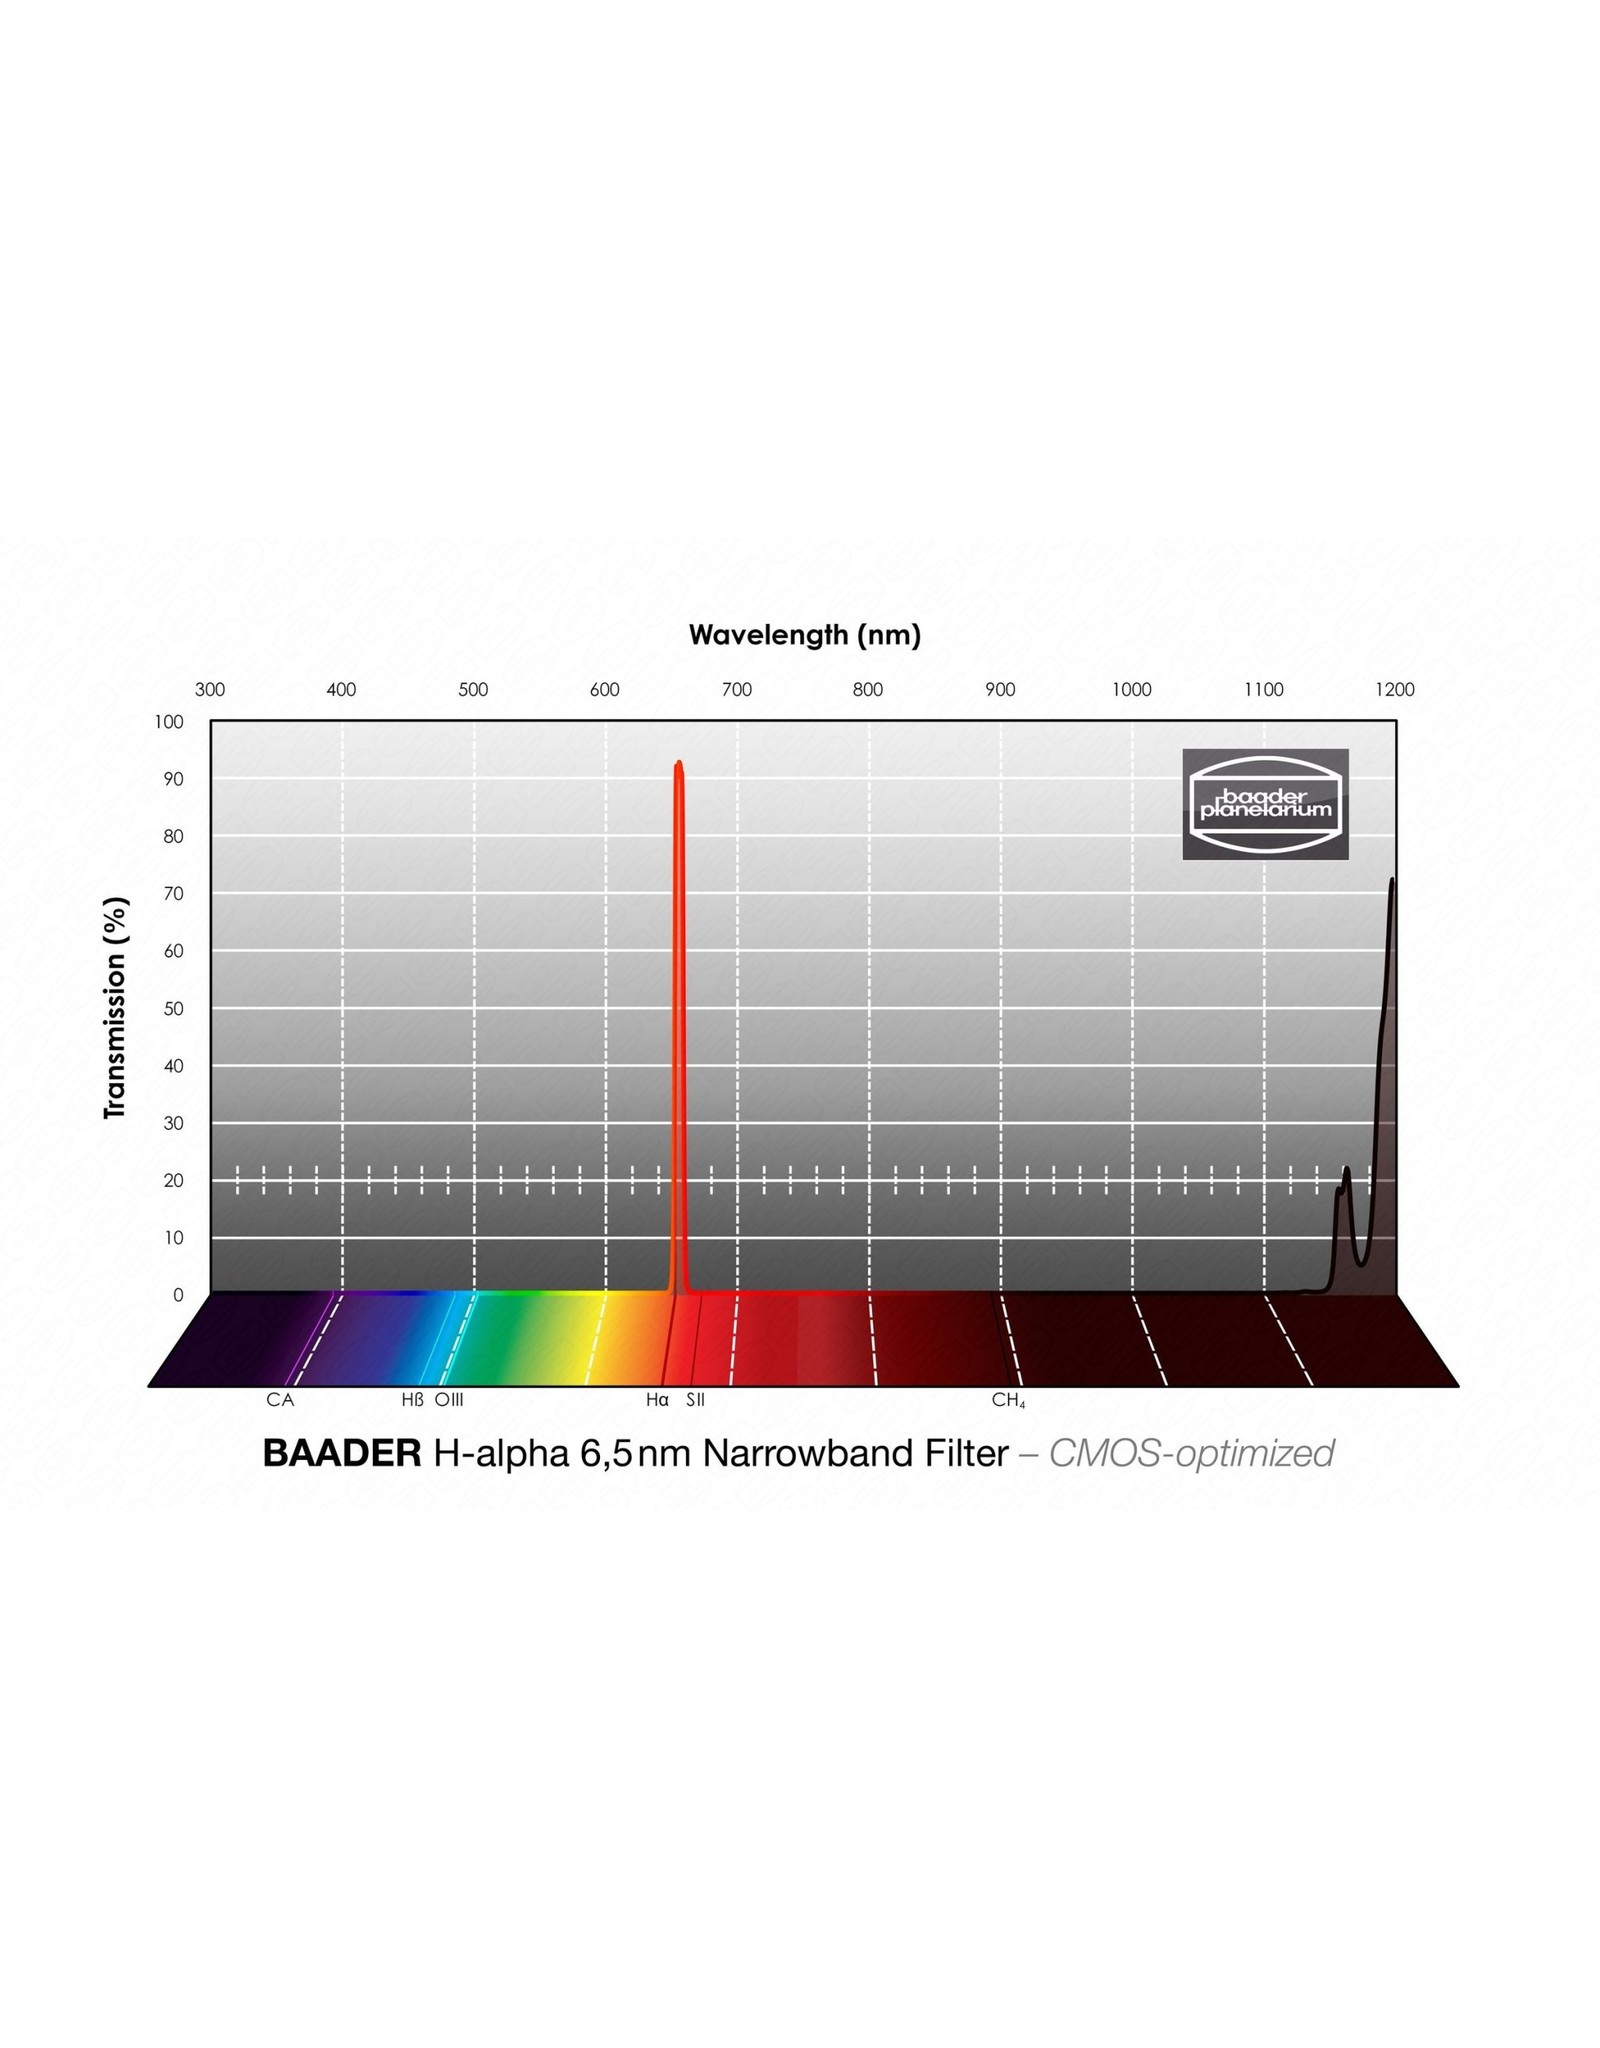 Baader Planetarium Baader 6.5nm Narrowband Sulfur-II Filters – CMOS-optimized (Specify Size)